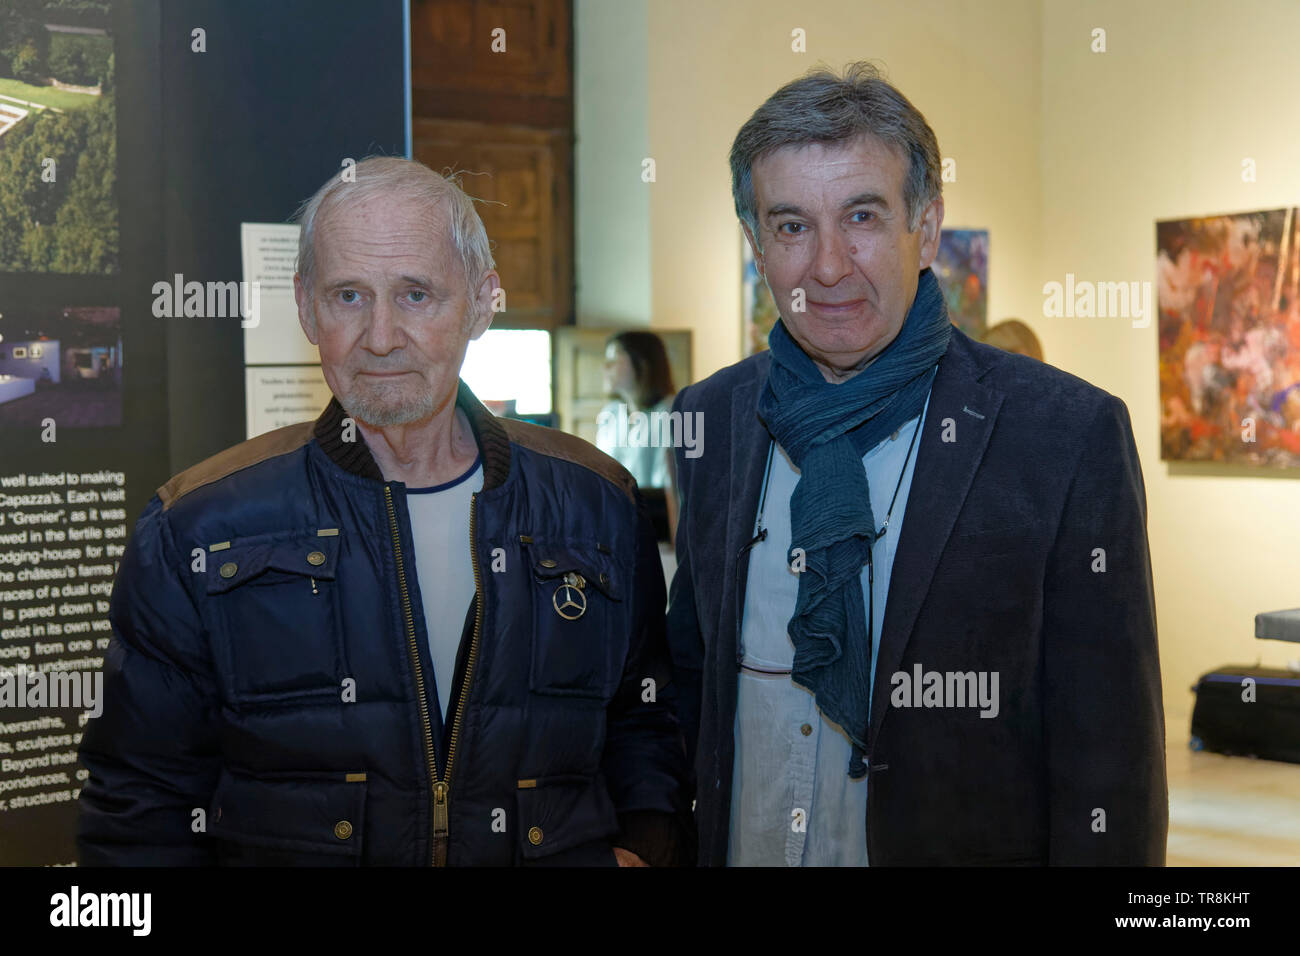 Tours, France.24th May,2019.Jacky Coville and a guest attend the Exhibition Re-naissance(s) of the Capazza Gallery in Tours, France Stock Photo